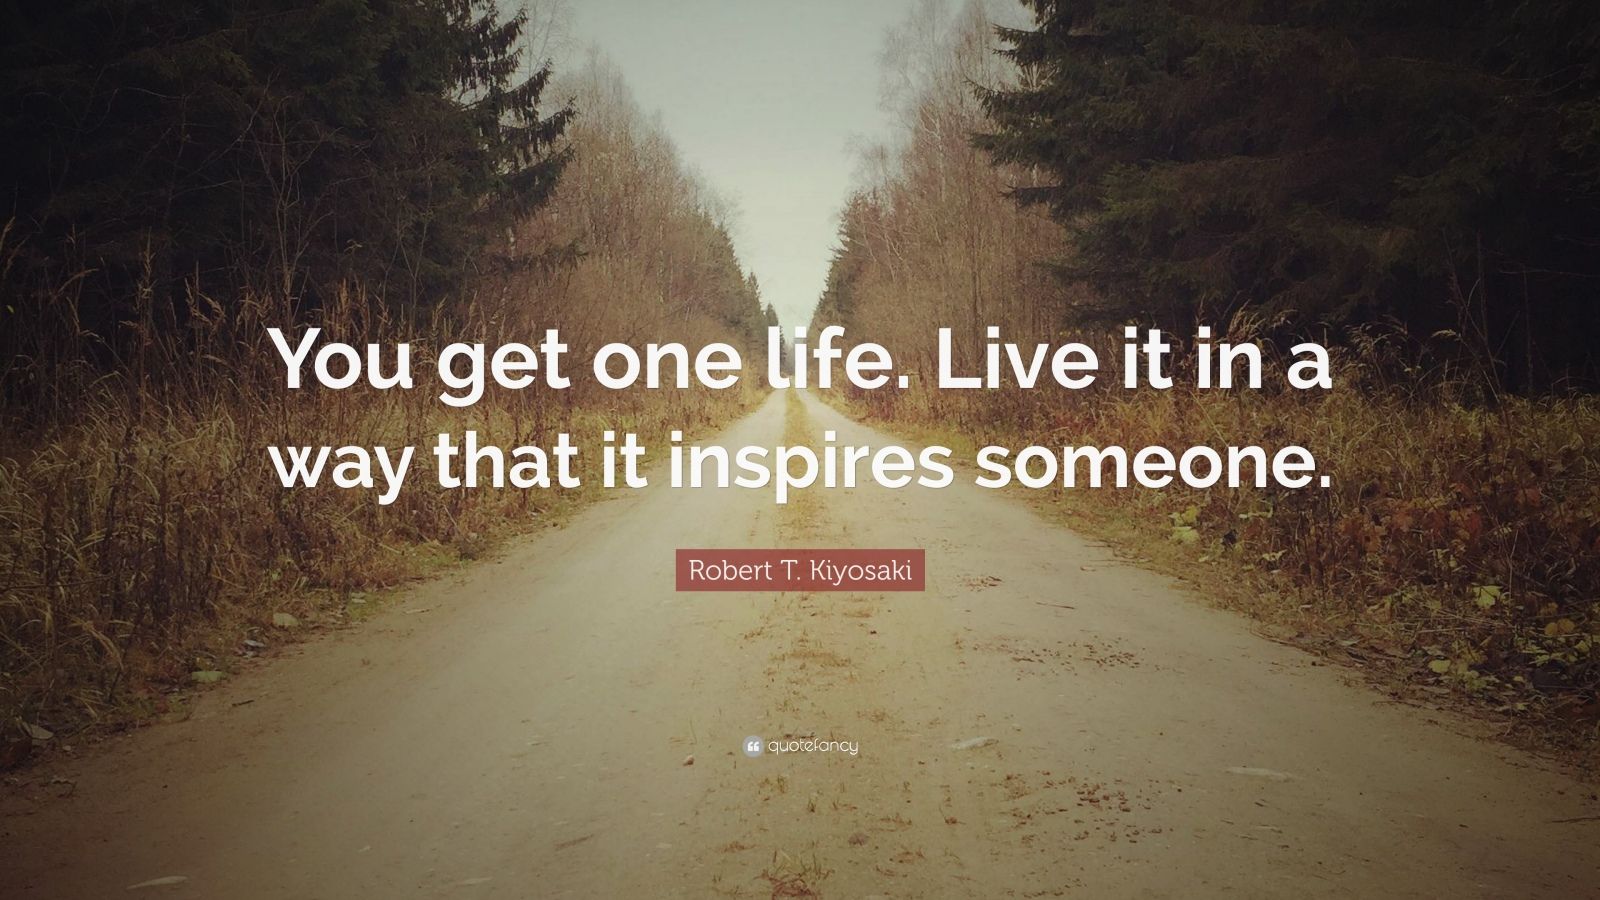 You get one life. Live it in a way that it inspires someone.